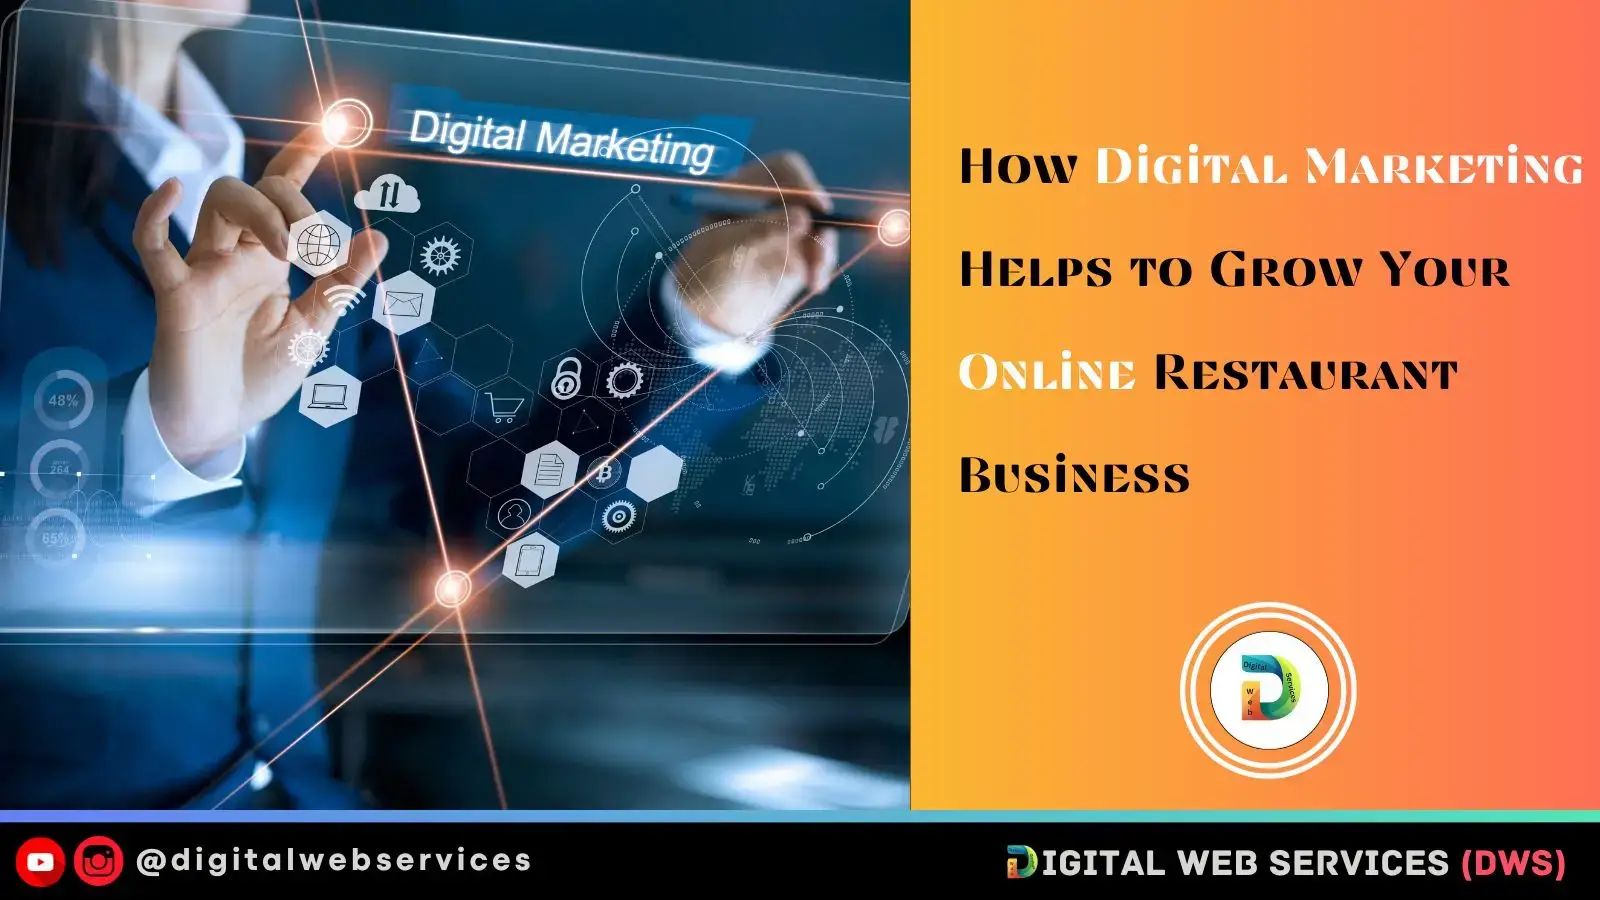 How Digital Marketing Helps to Grow Your Online Restaurant Business